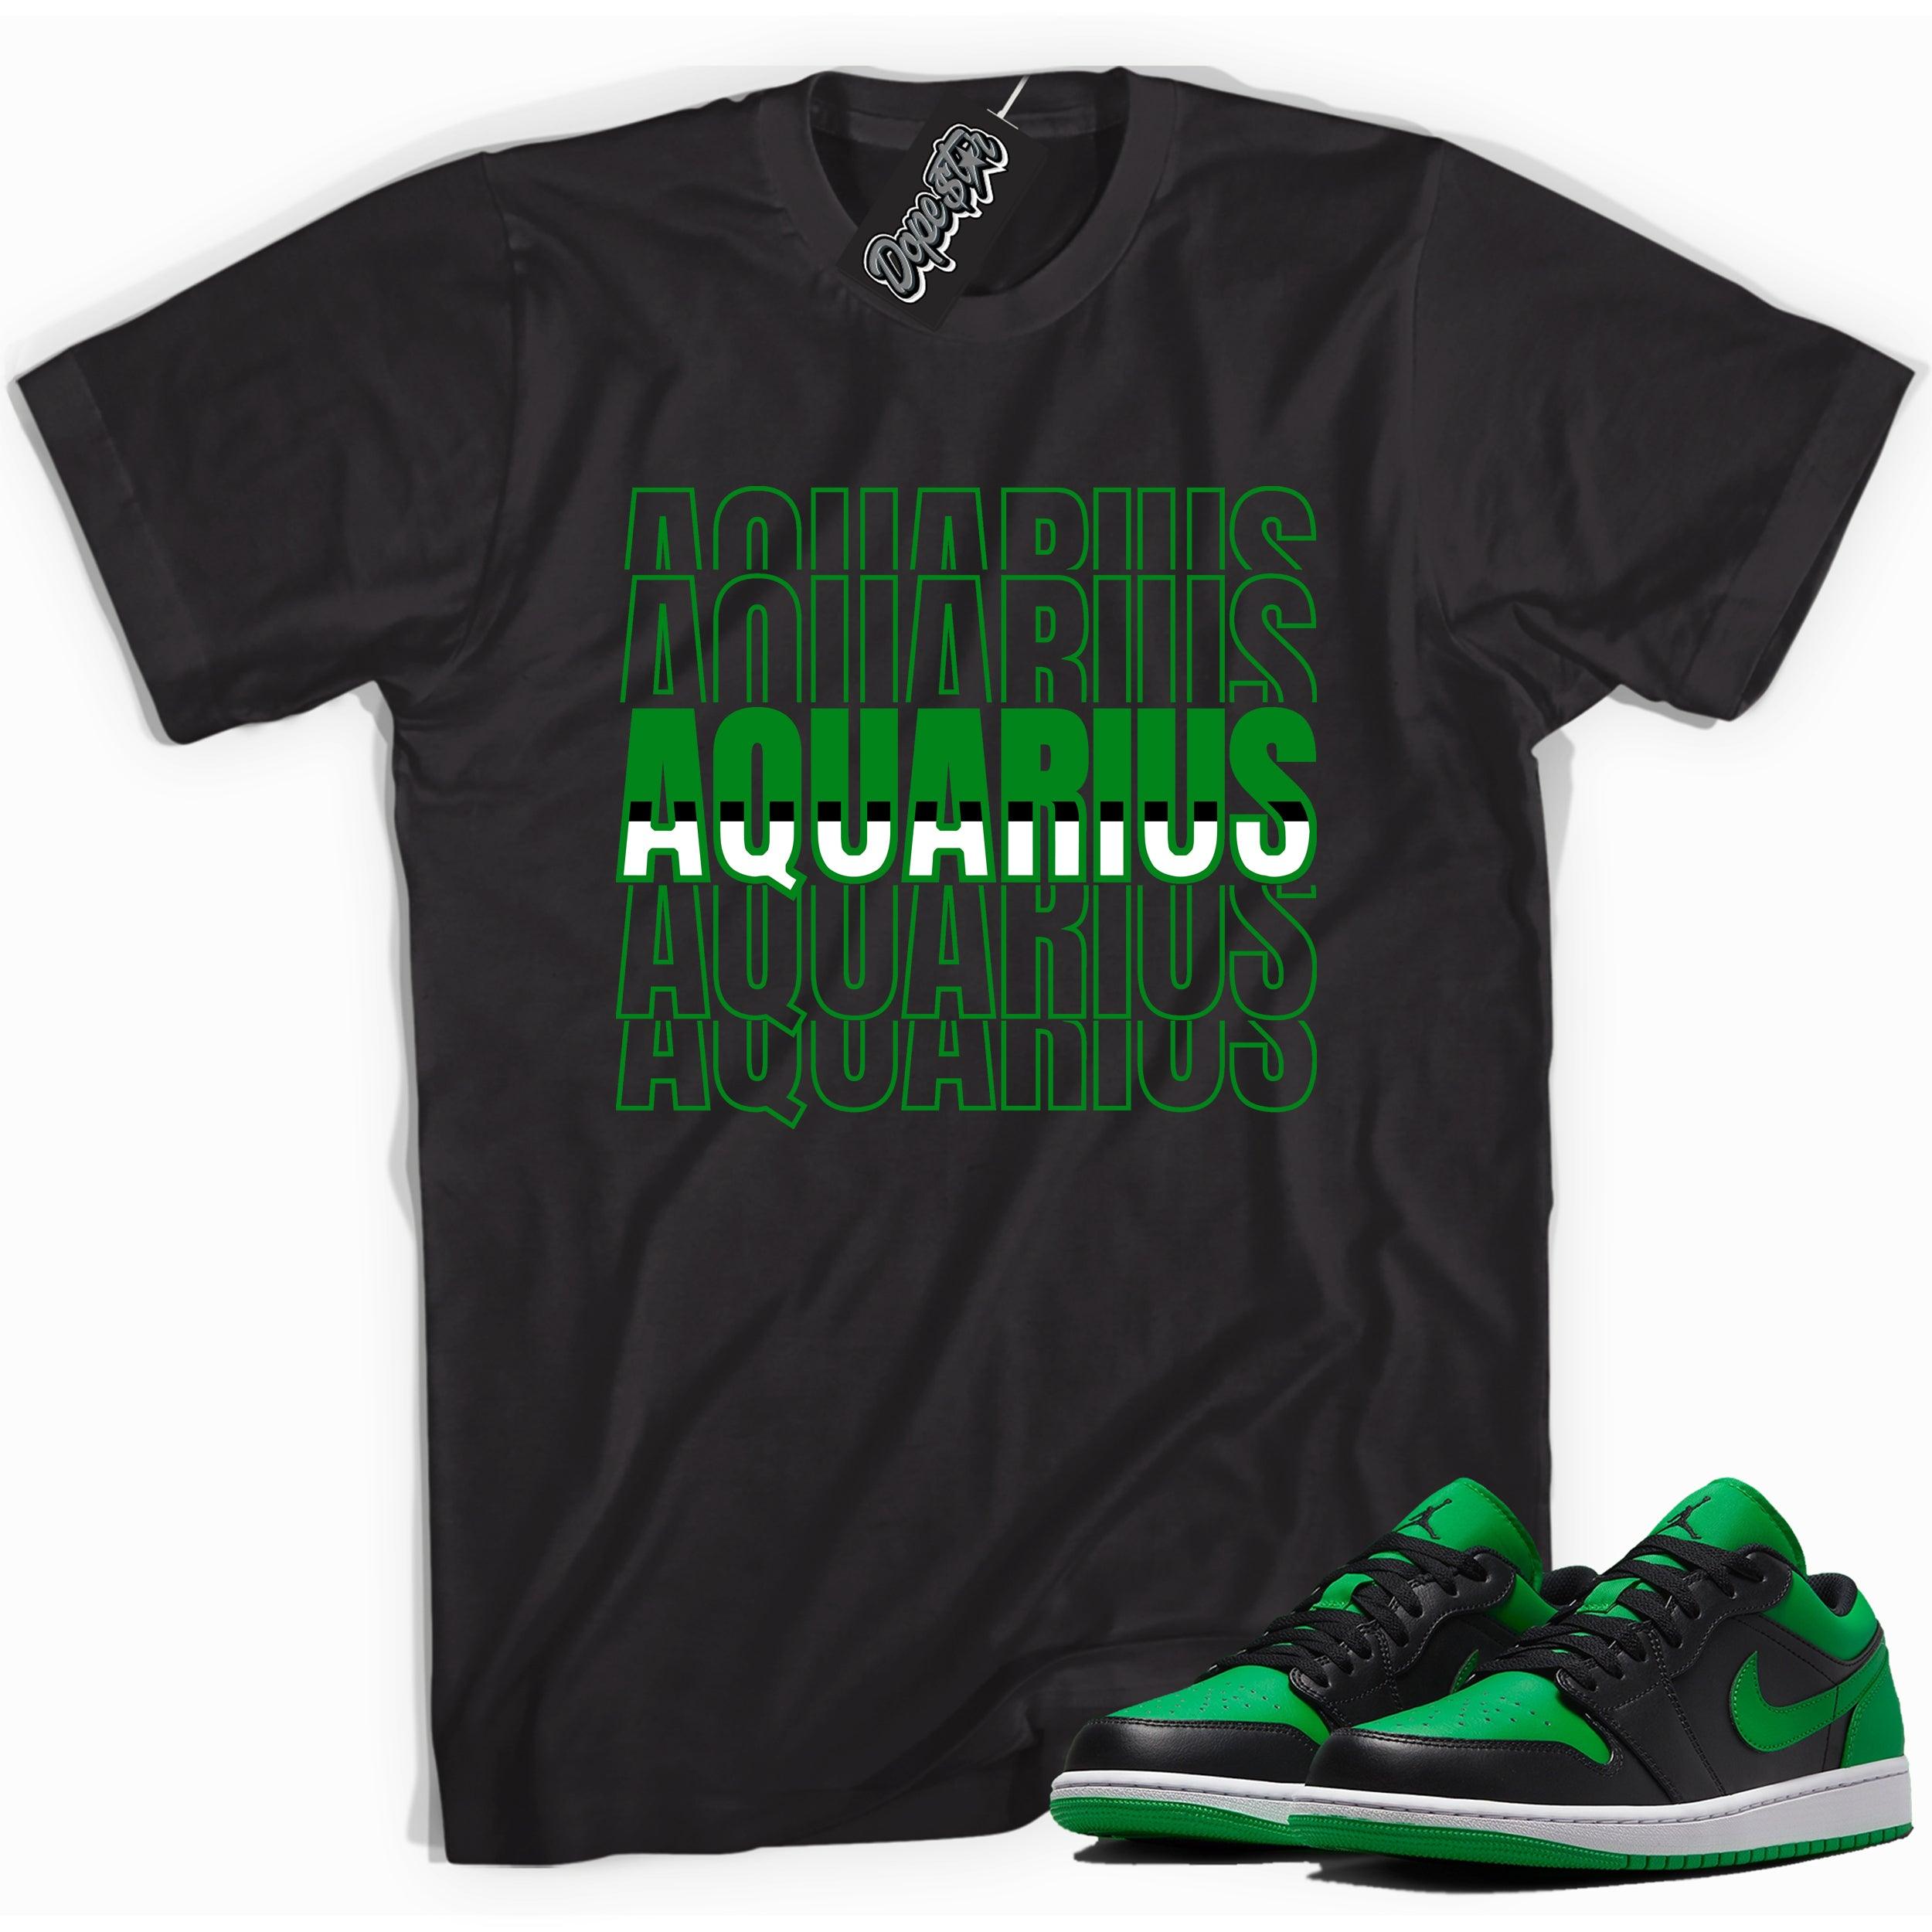 Cool black graphic tee with 'Aquarius' print, that perfectly matches Air Jordan 1 Low Lucky Green sneakers